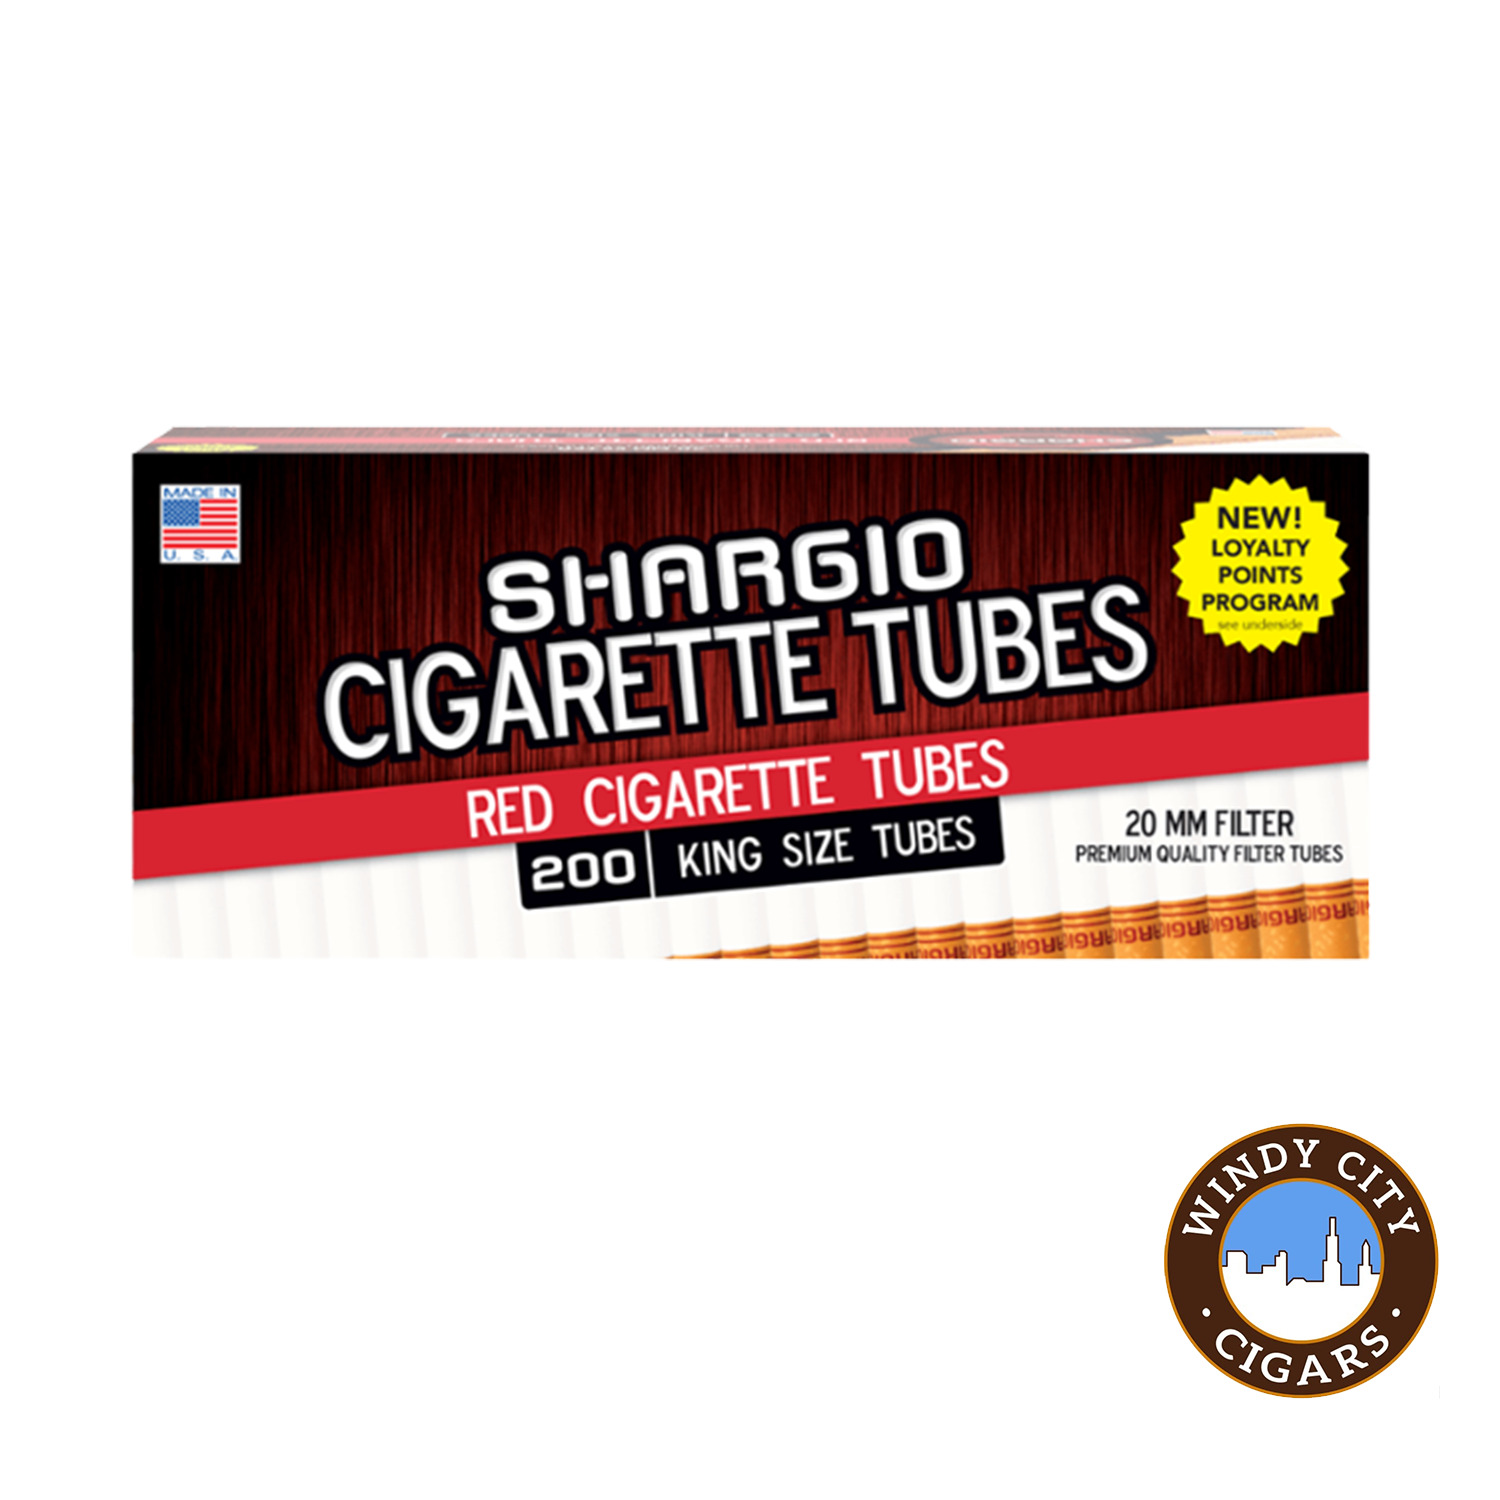 Shargio Red King Cigarette 200ct Tubes - 5 Boxes